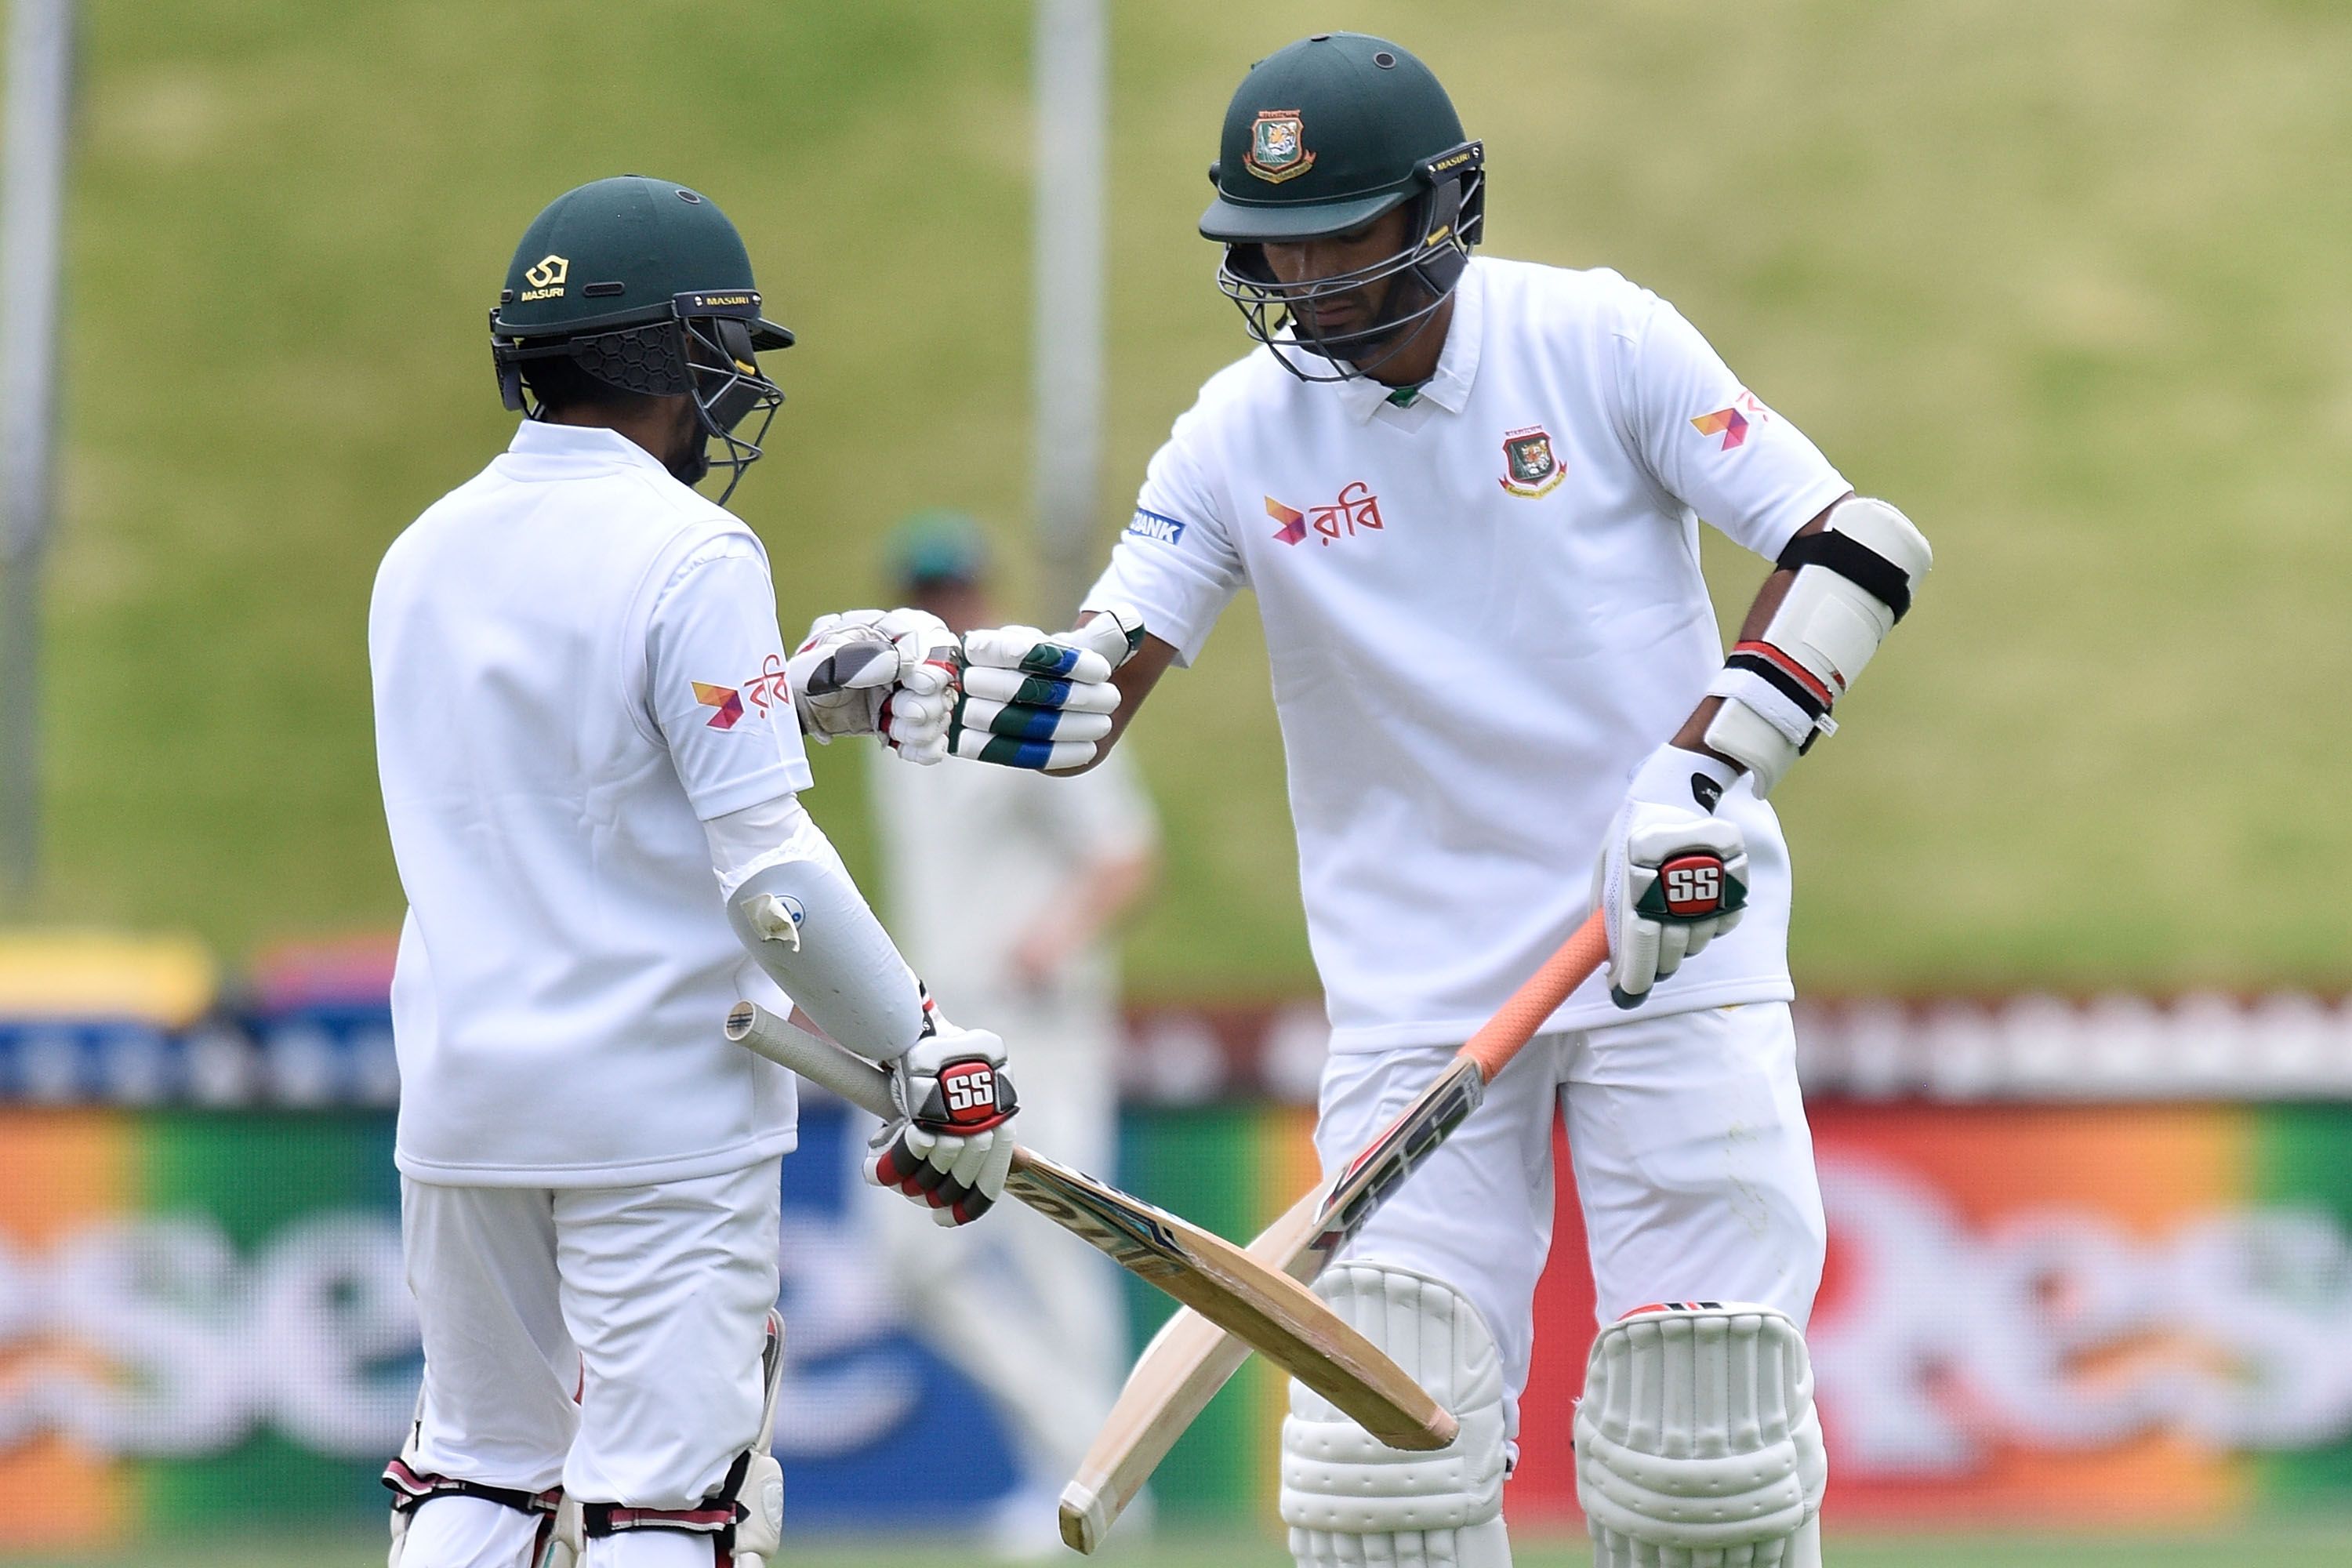 Cricket: South Africa opt to bat against Sri Lanka in Amla's 100th test